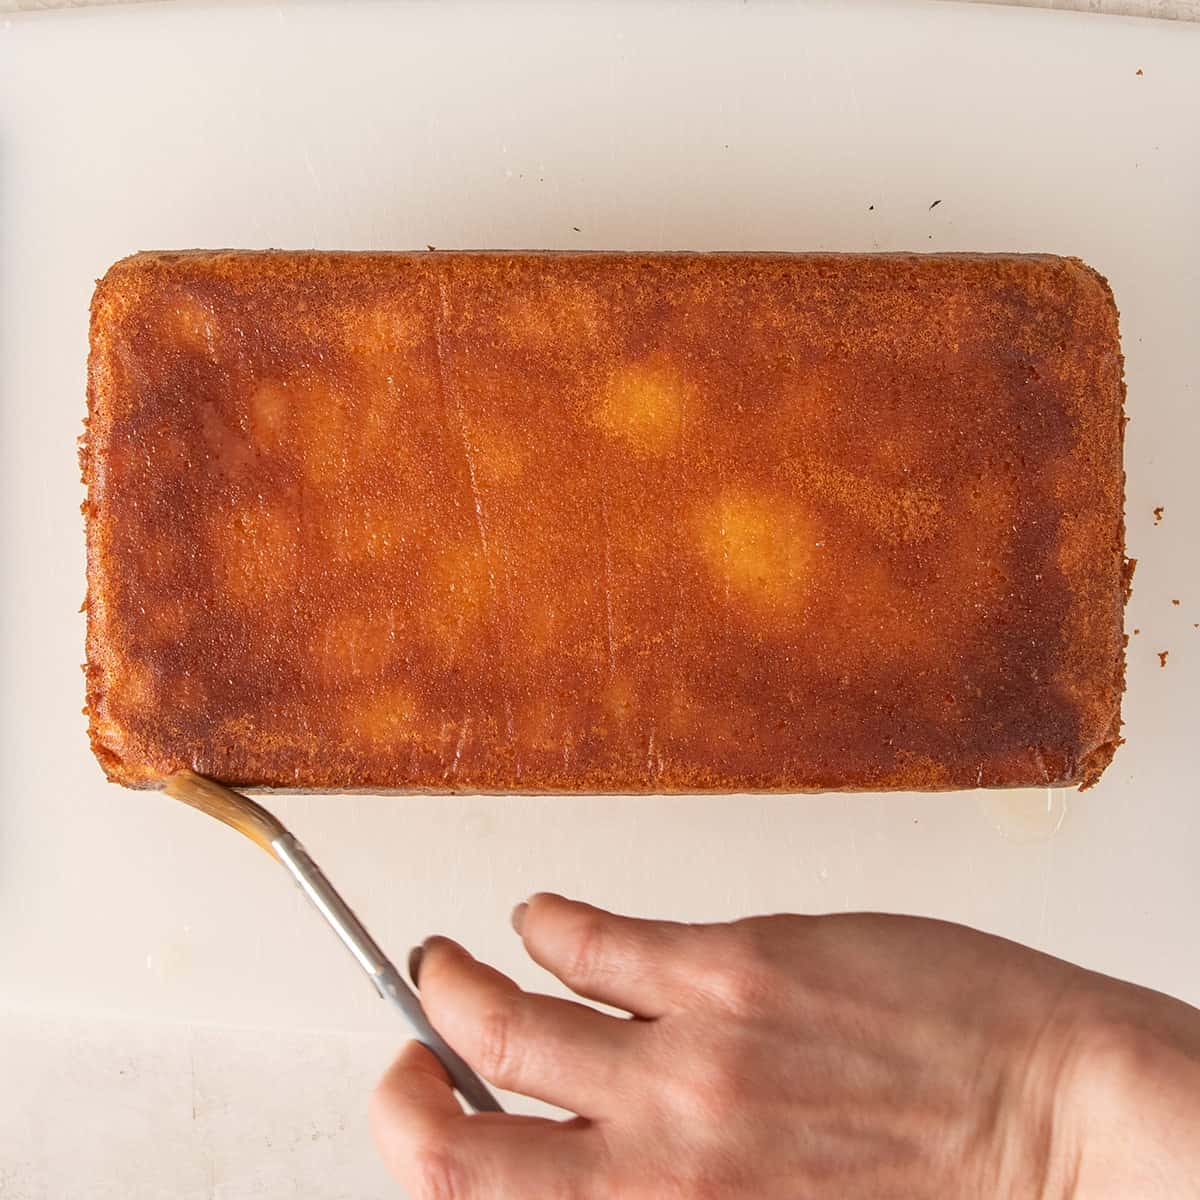 A hand brushing a syrup mixture onto the sides of an upside down cake.